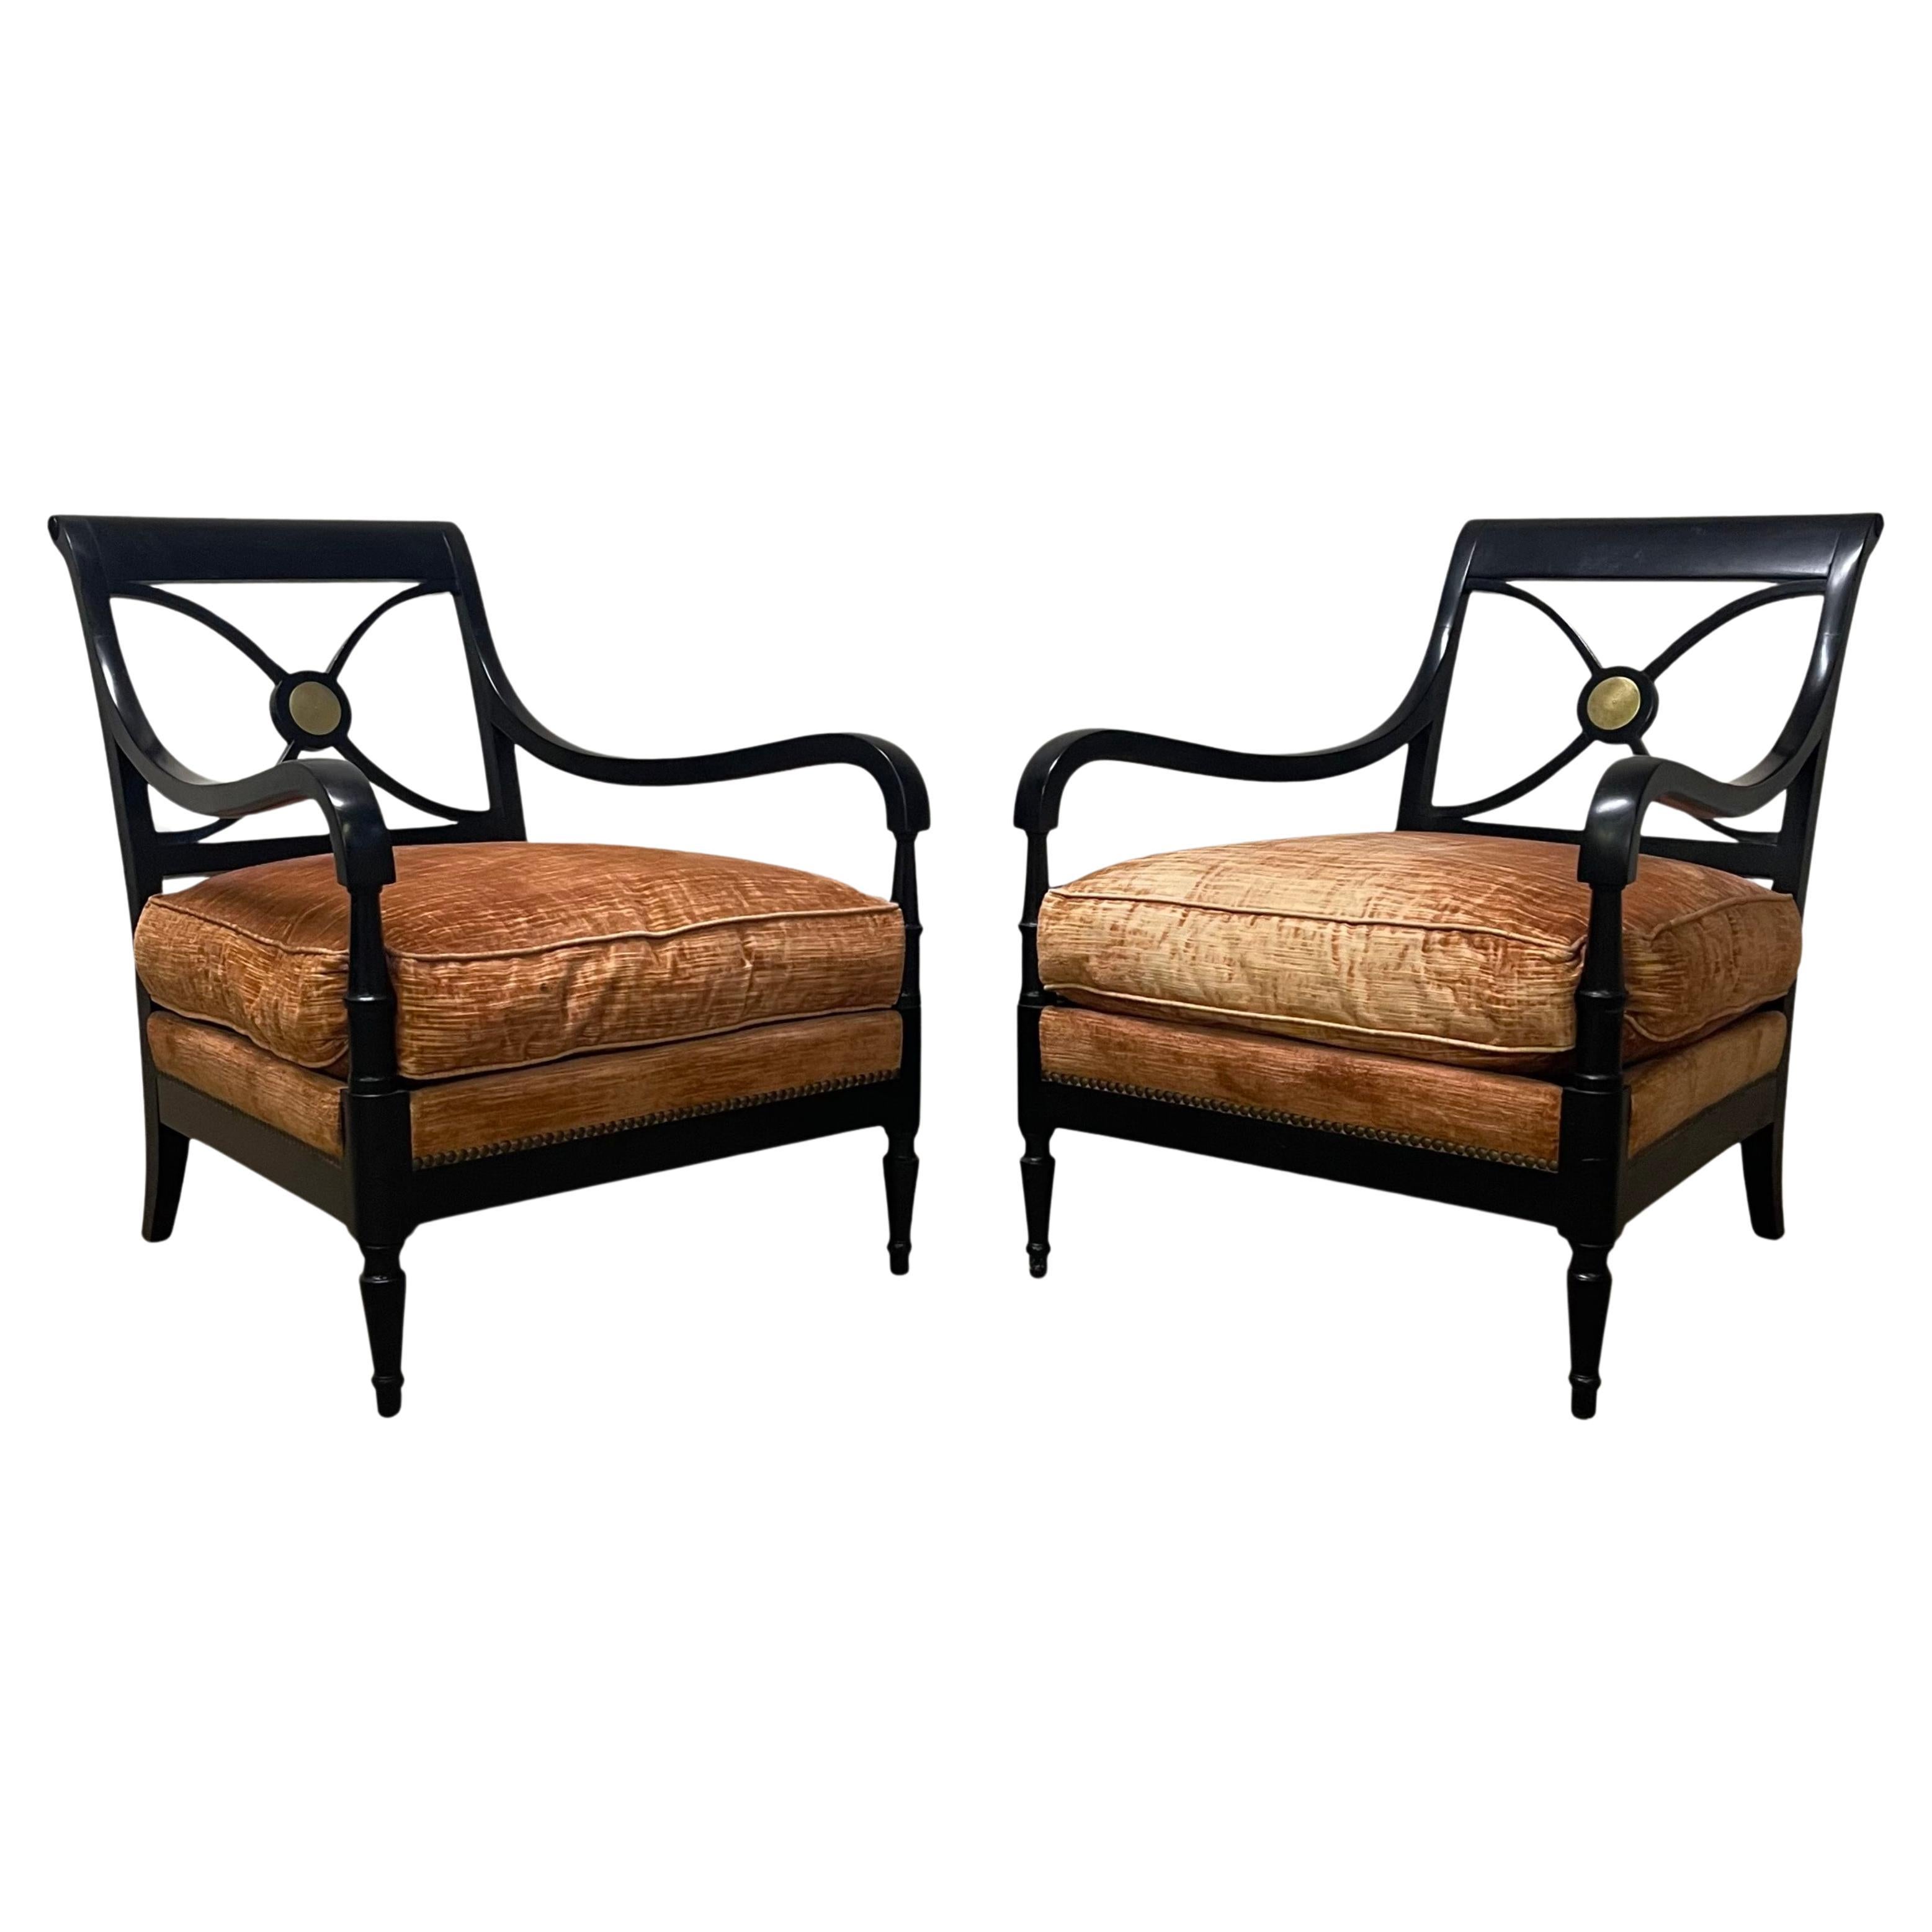 Pair of Ebonised Chairs by Maison Jansen, circa 1940 For Sale